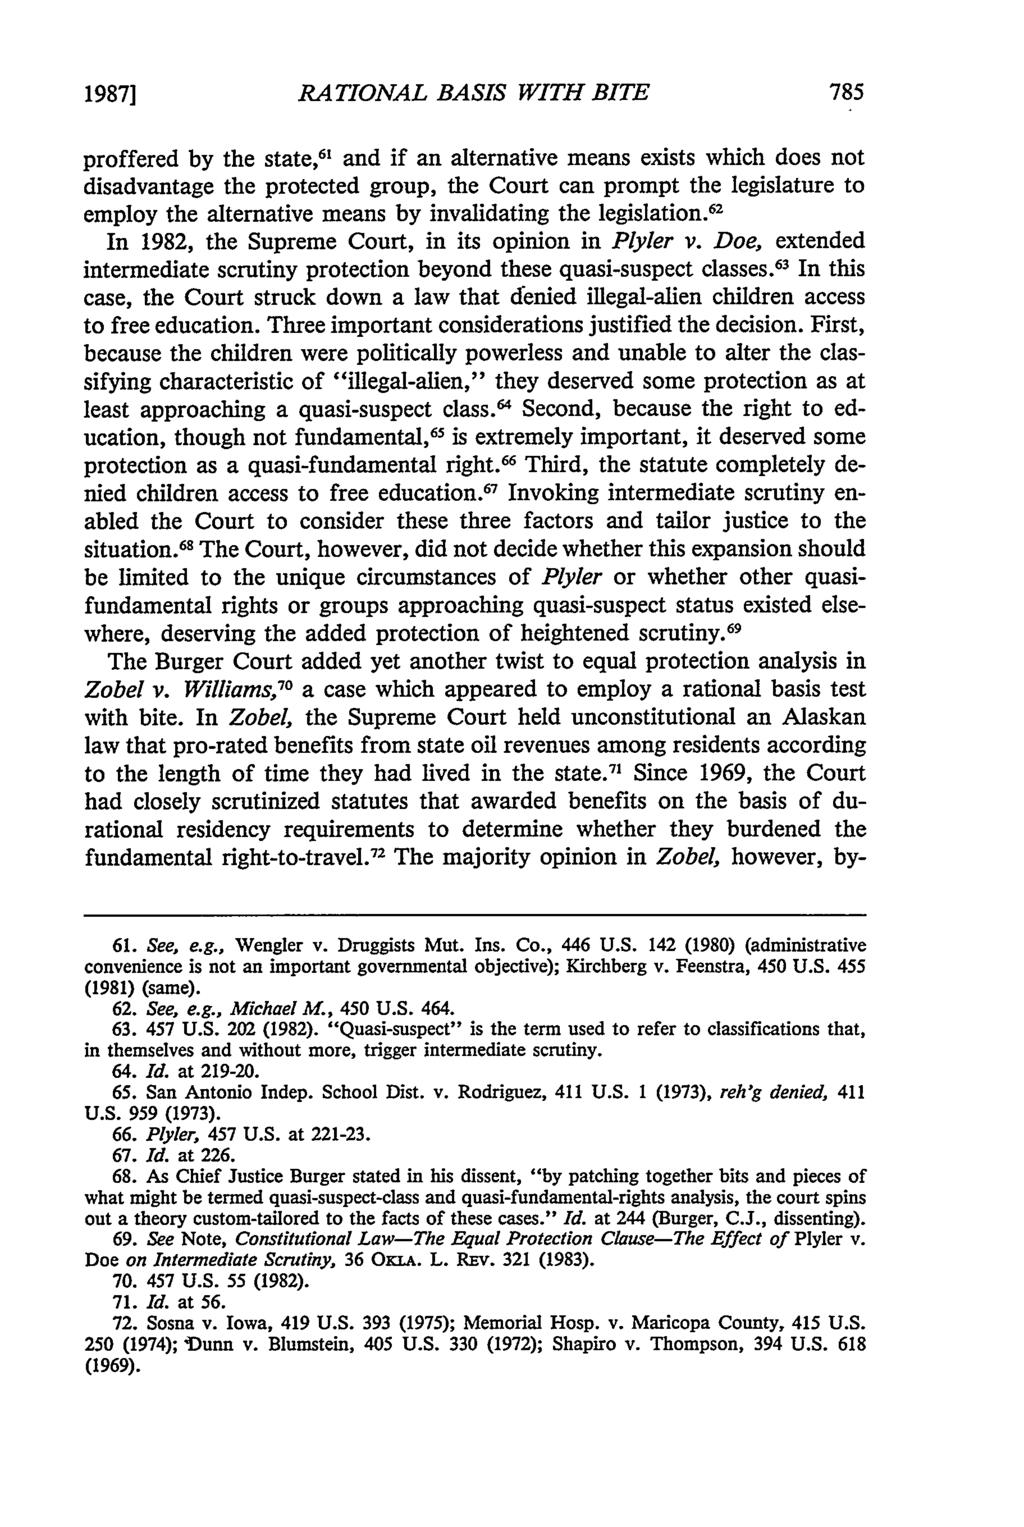 1987] RATIONAL BASIS WITH BITE proffered by the state, 61 and if an alternative means exists which does not disadvantage the protected group, the Court can prompt the legislature to employ the